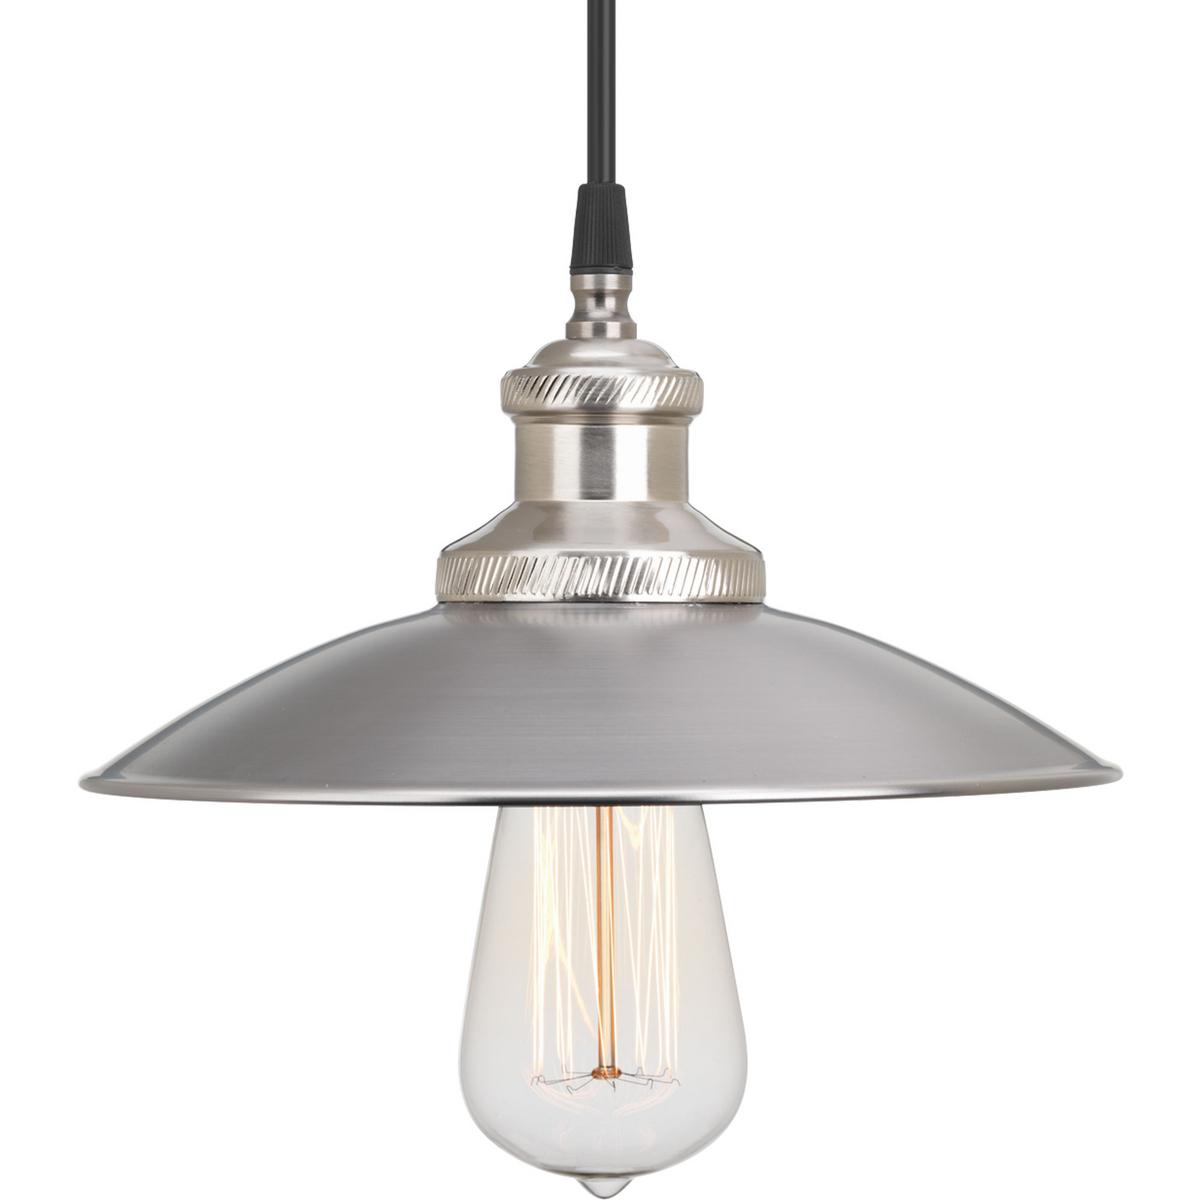 Hubbell P5161-81 Pendants have the power to change a look of a room instantly. Today, they can be seen in bath and vanity areas, kitchens and foyers - and as singles or in groups of two or more. With Archives' pendants and wall sconce, carefully crafted details and specia